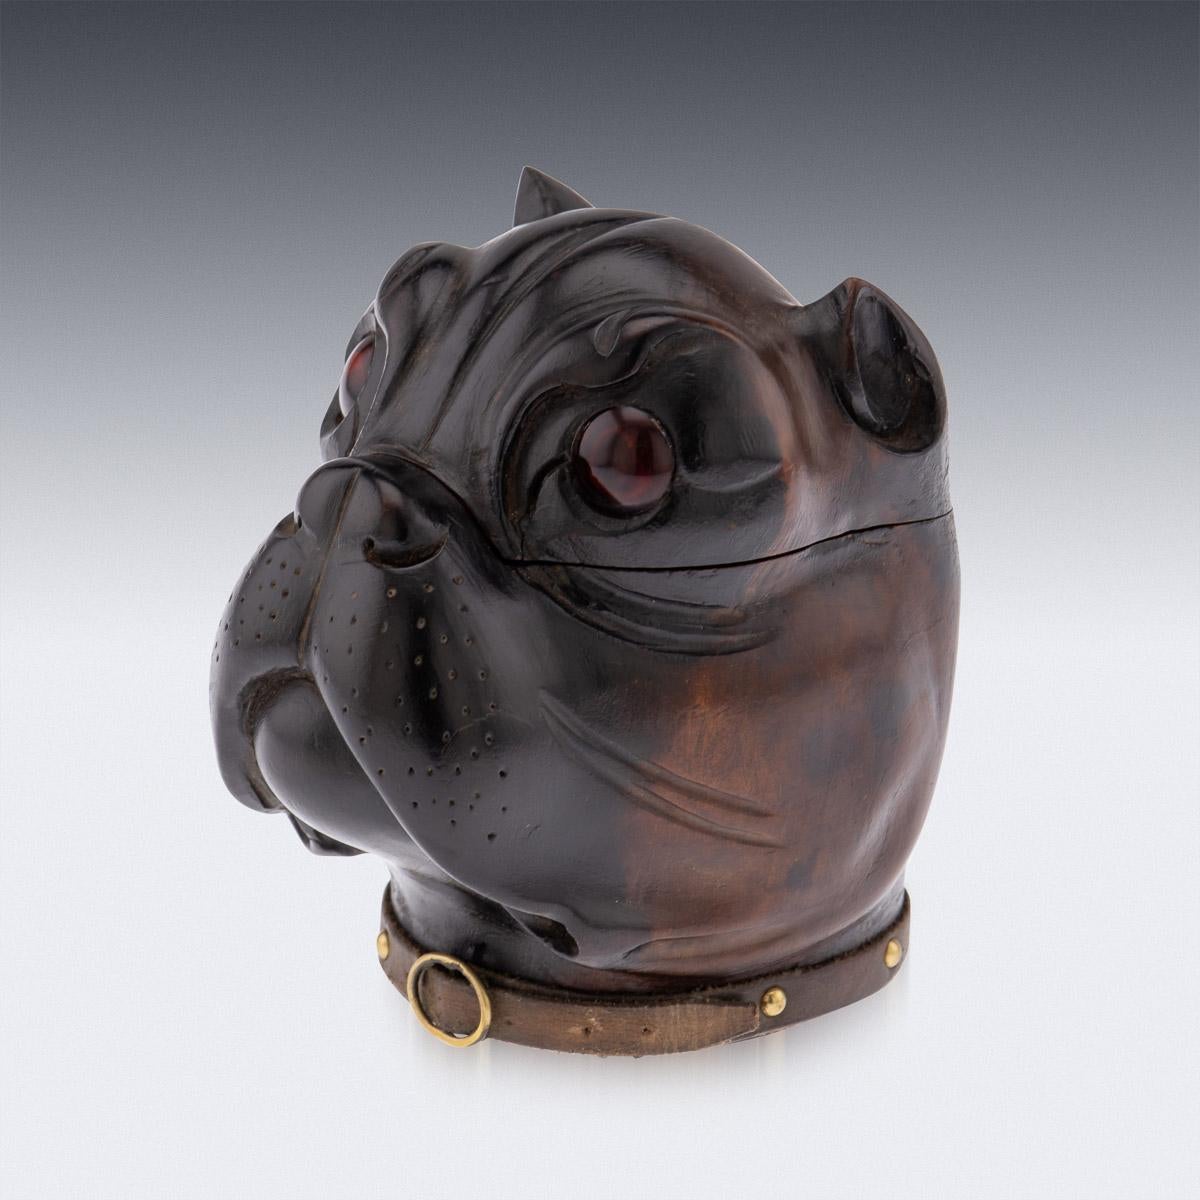 19th century Victorian lignum vitae inkwell modelled as the head of a bulldog with realistic red glass inset eyes, original leather collar with a copper buckle. The head is hinged and opens to reveal an empty ink pot insert compartment with a brass